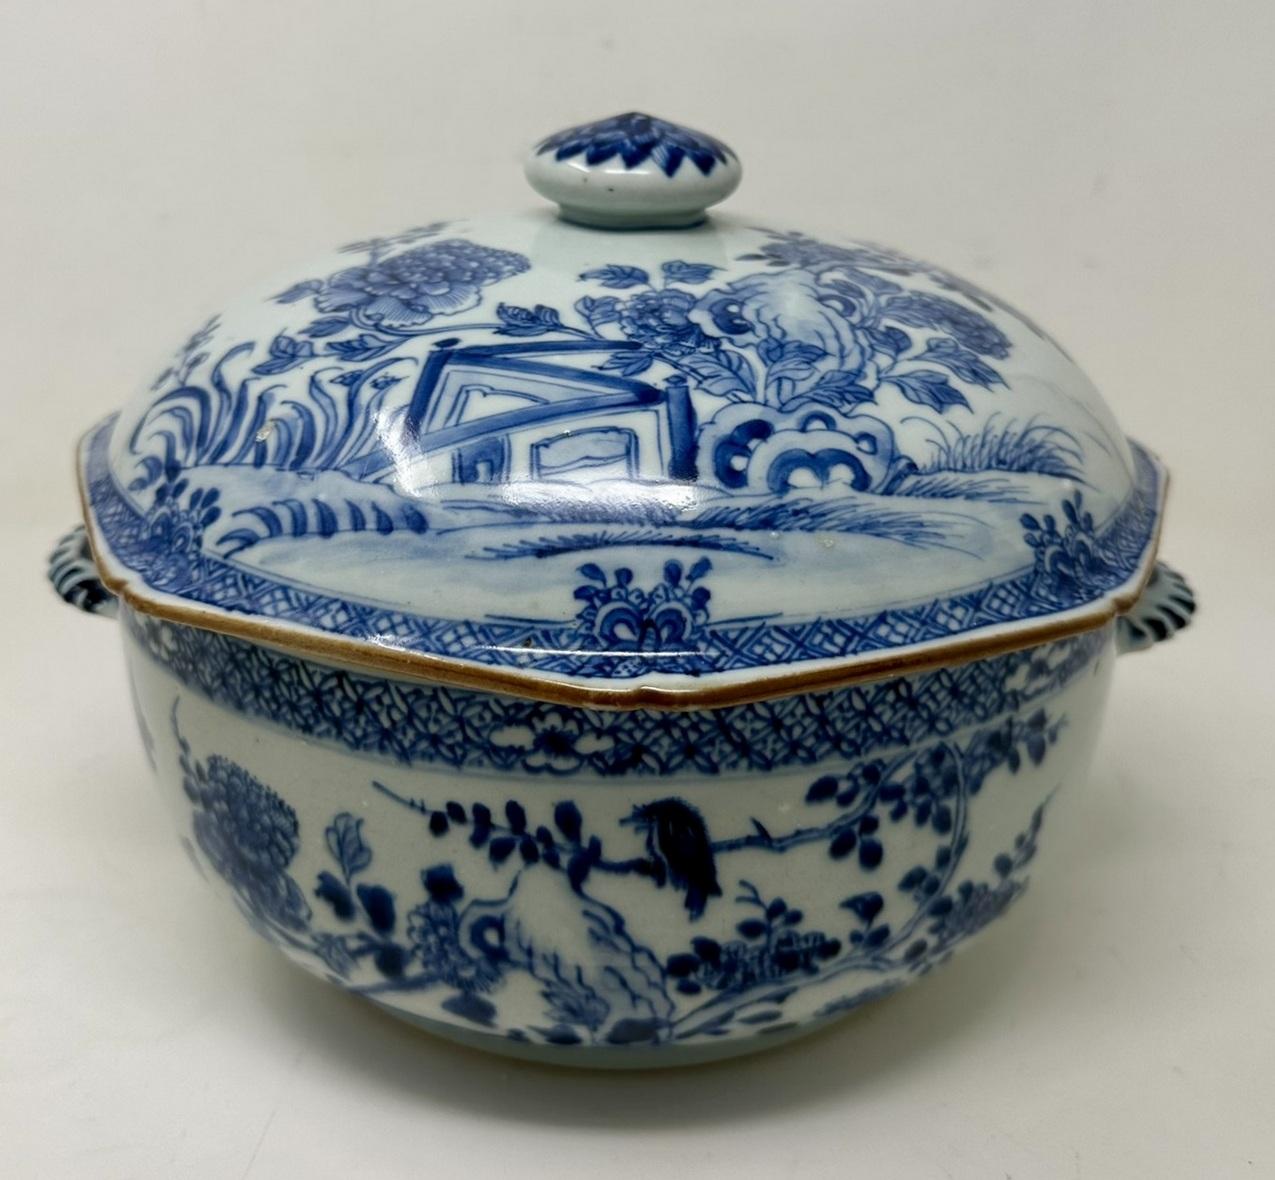 Qing Antique Chinese Export Porcelain Blue White Chien Lung Soup Tureen Centerpiece For Sale